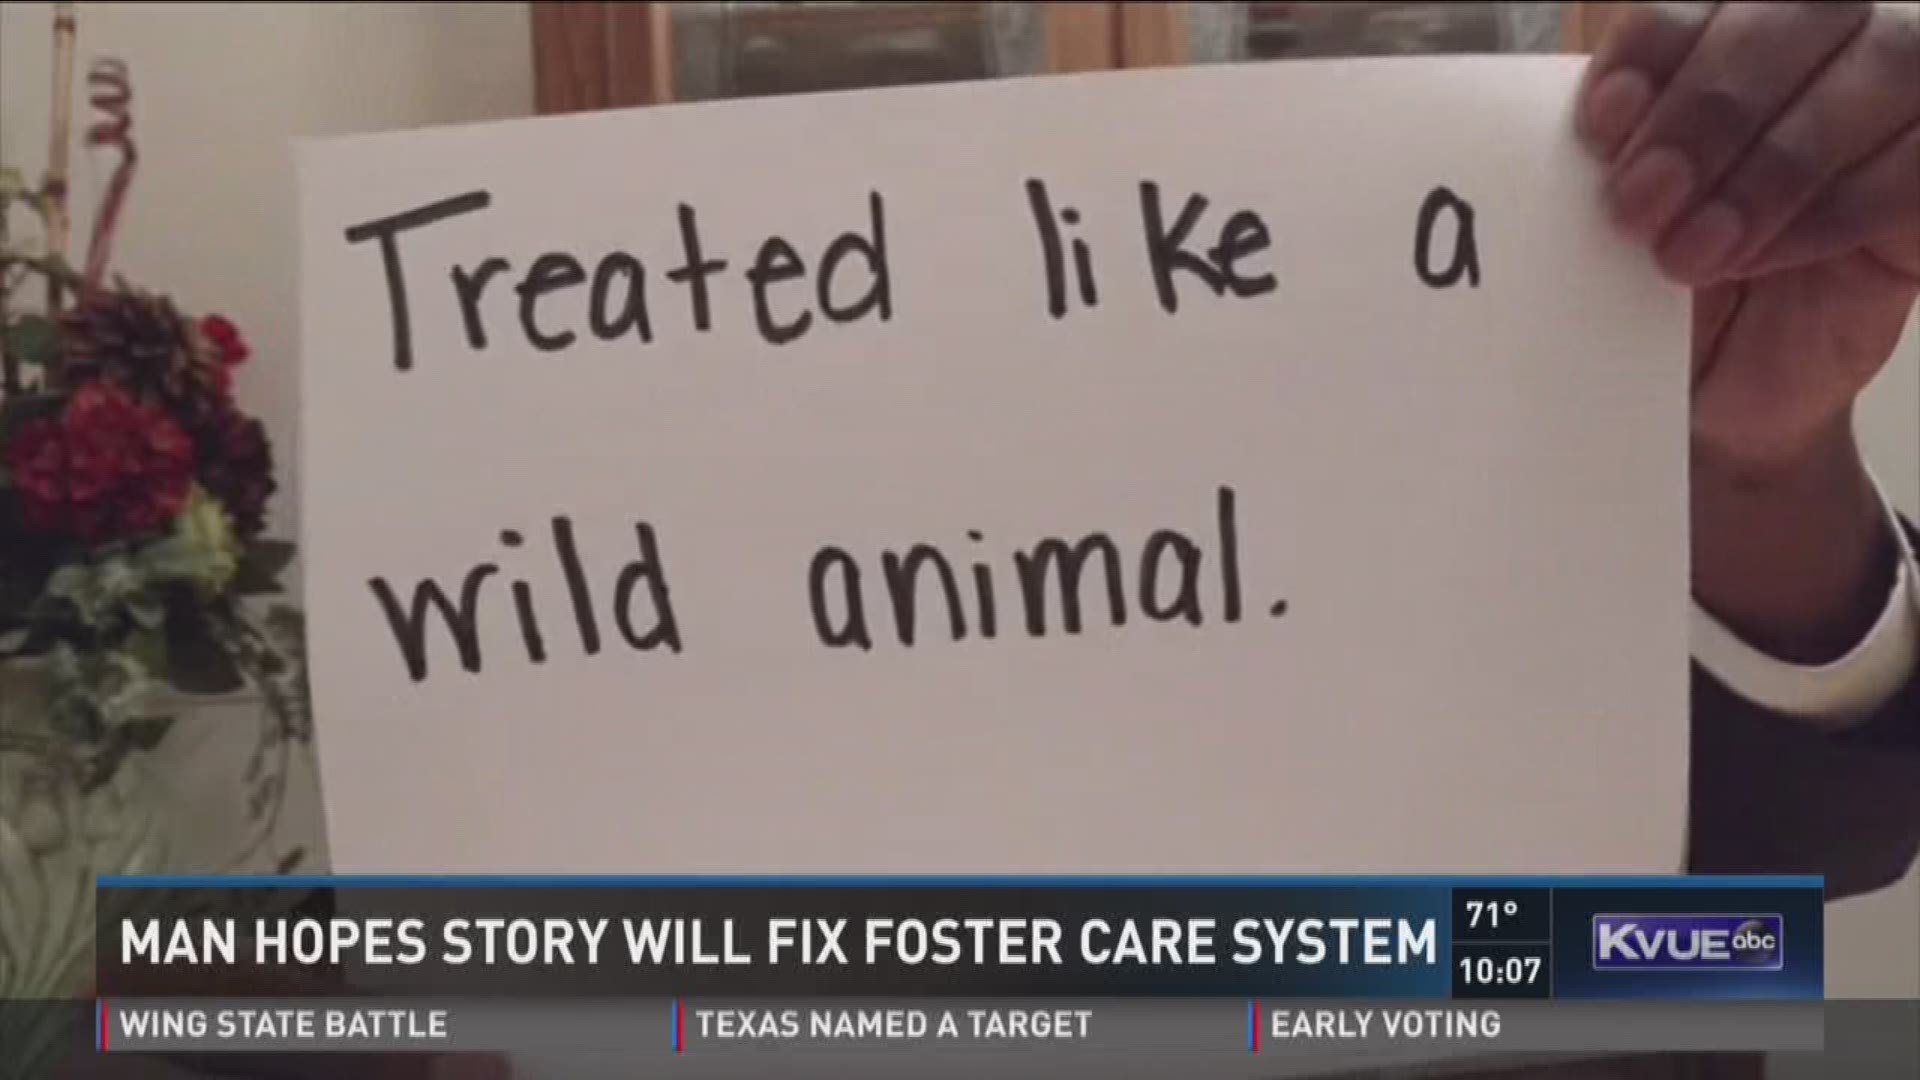 Man hopes story will fix foster care system